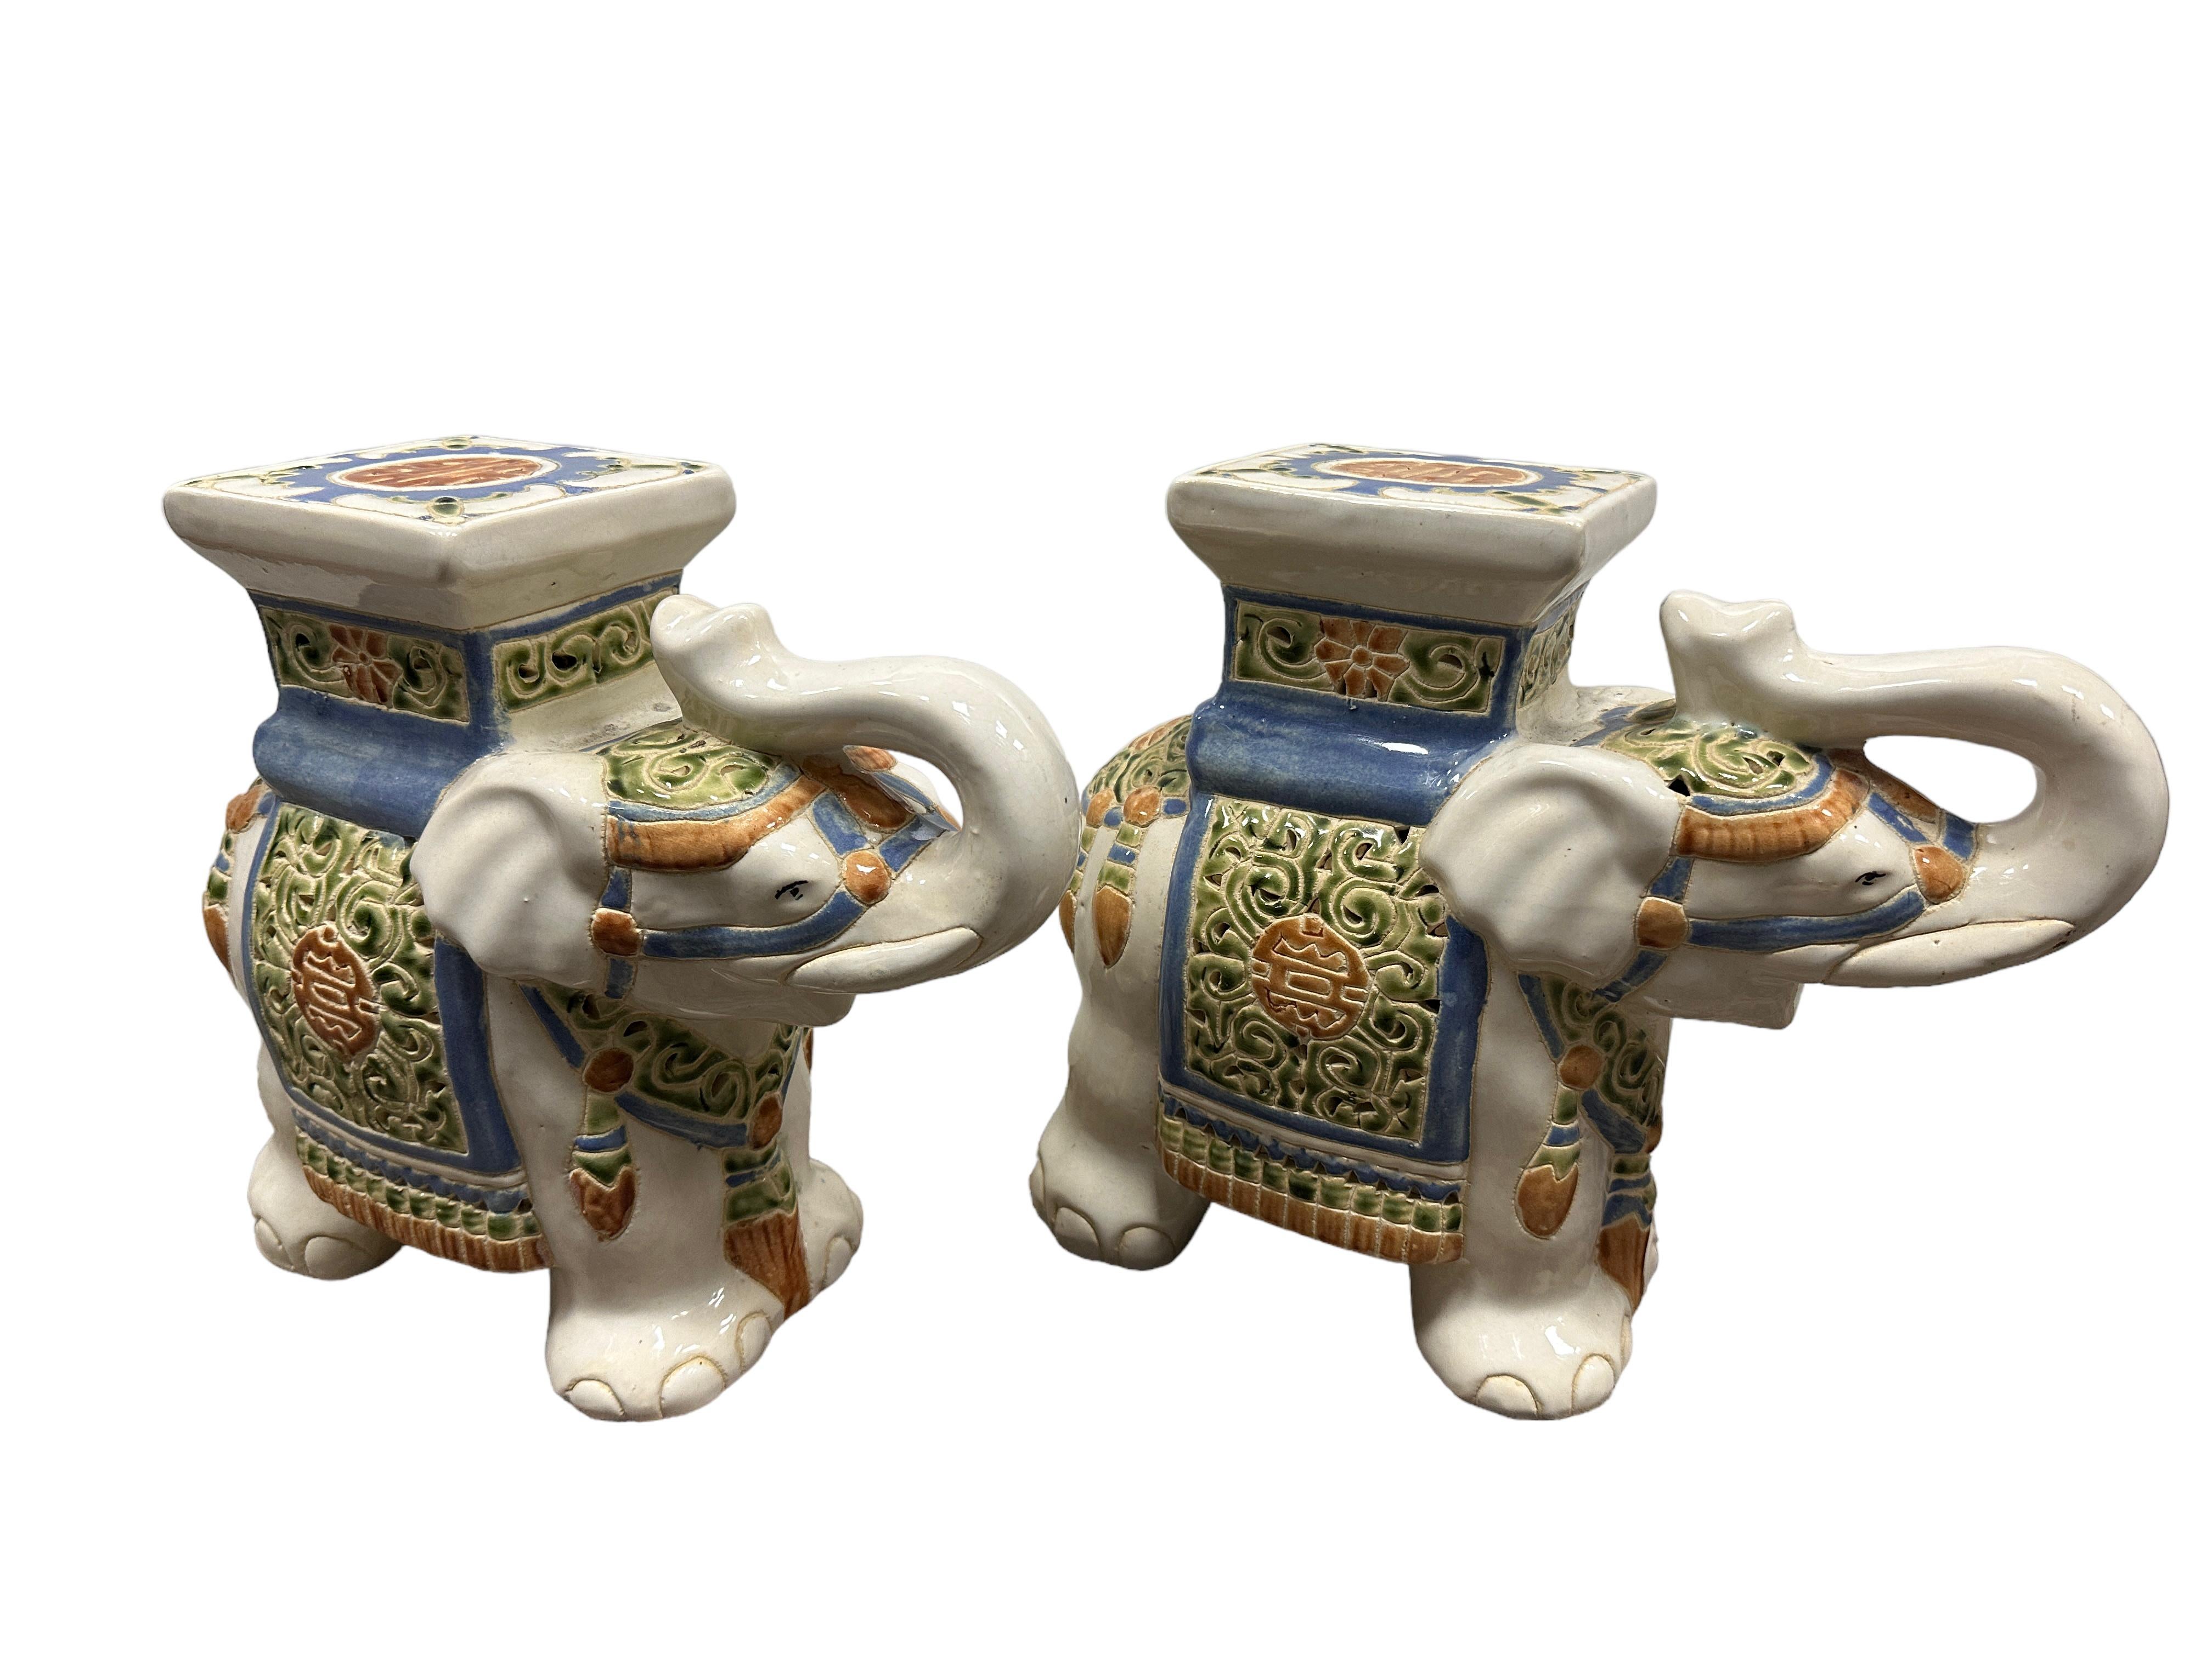 A pair of petite mid-20th century glazed ceramic elephant flower pot seats. Handmade of ceramic. Nice addition to your home, patio or garden. Found at an Estate Sale in Nuremberg, Germany. 
     